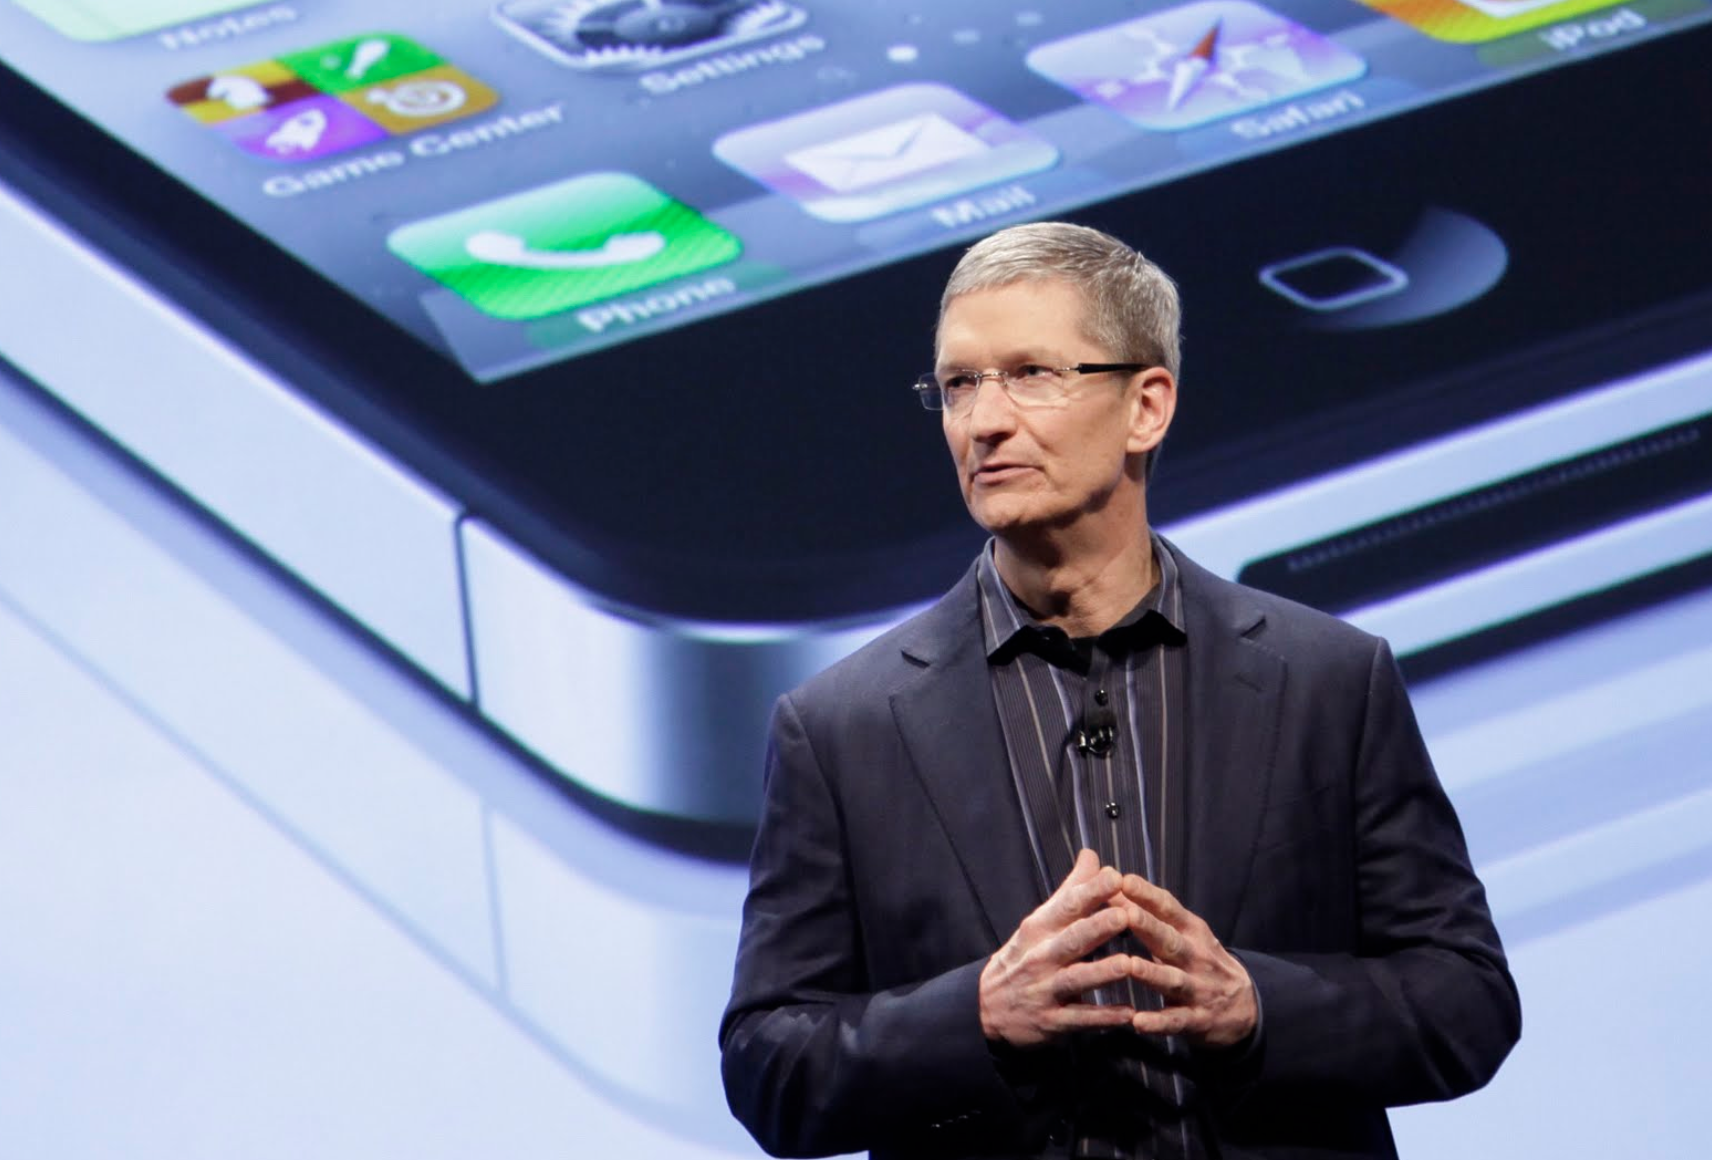 Tim Cook Best CEO of 2012